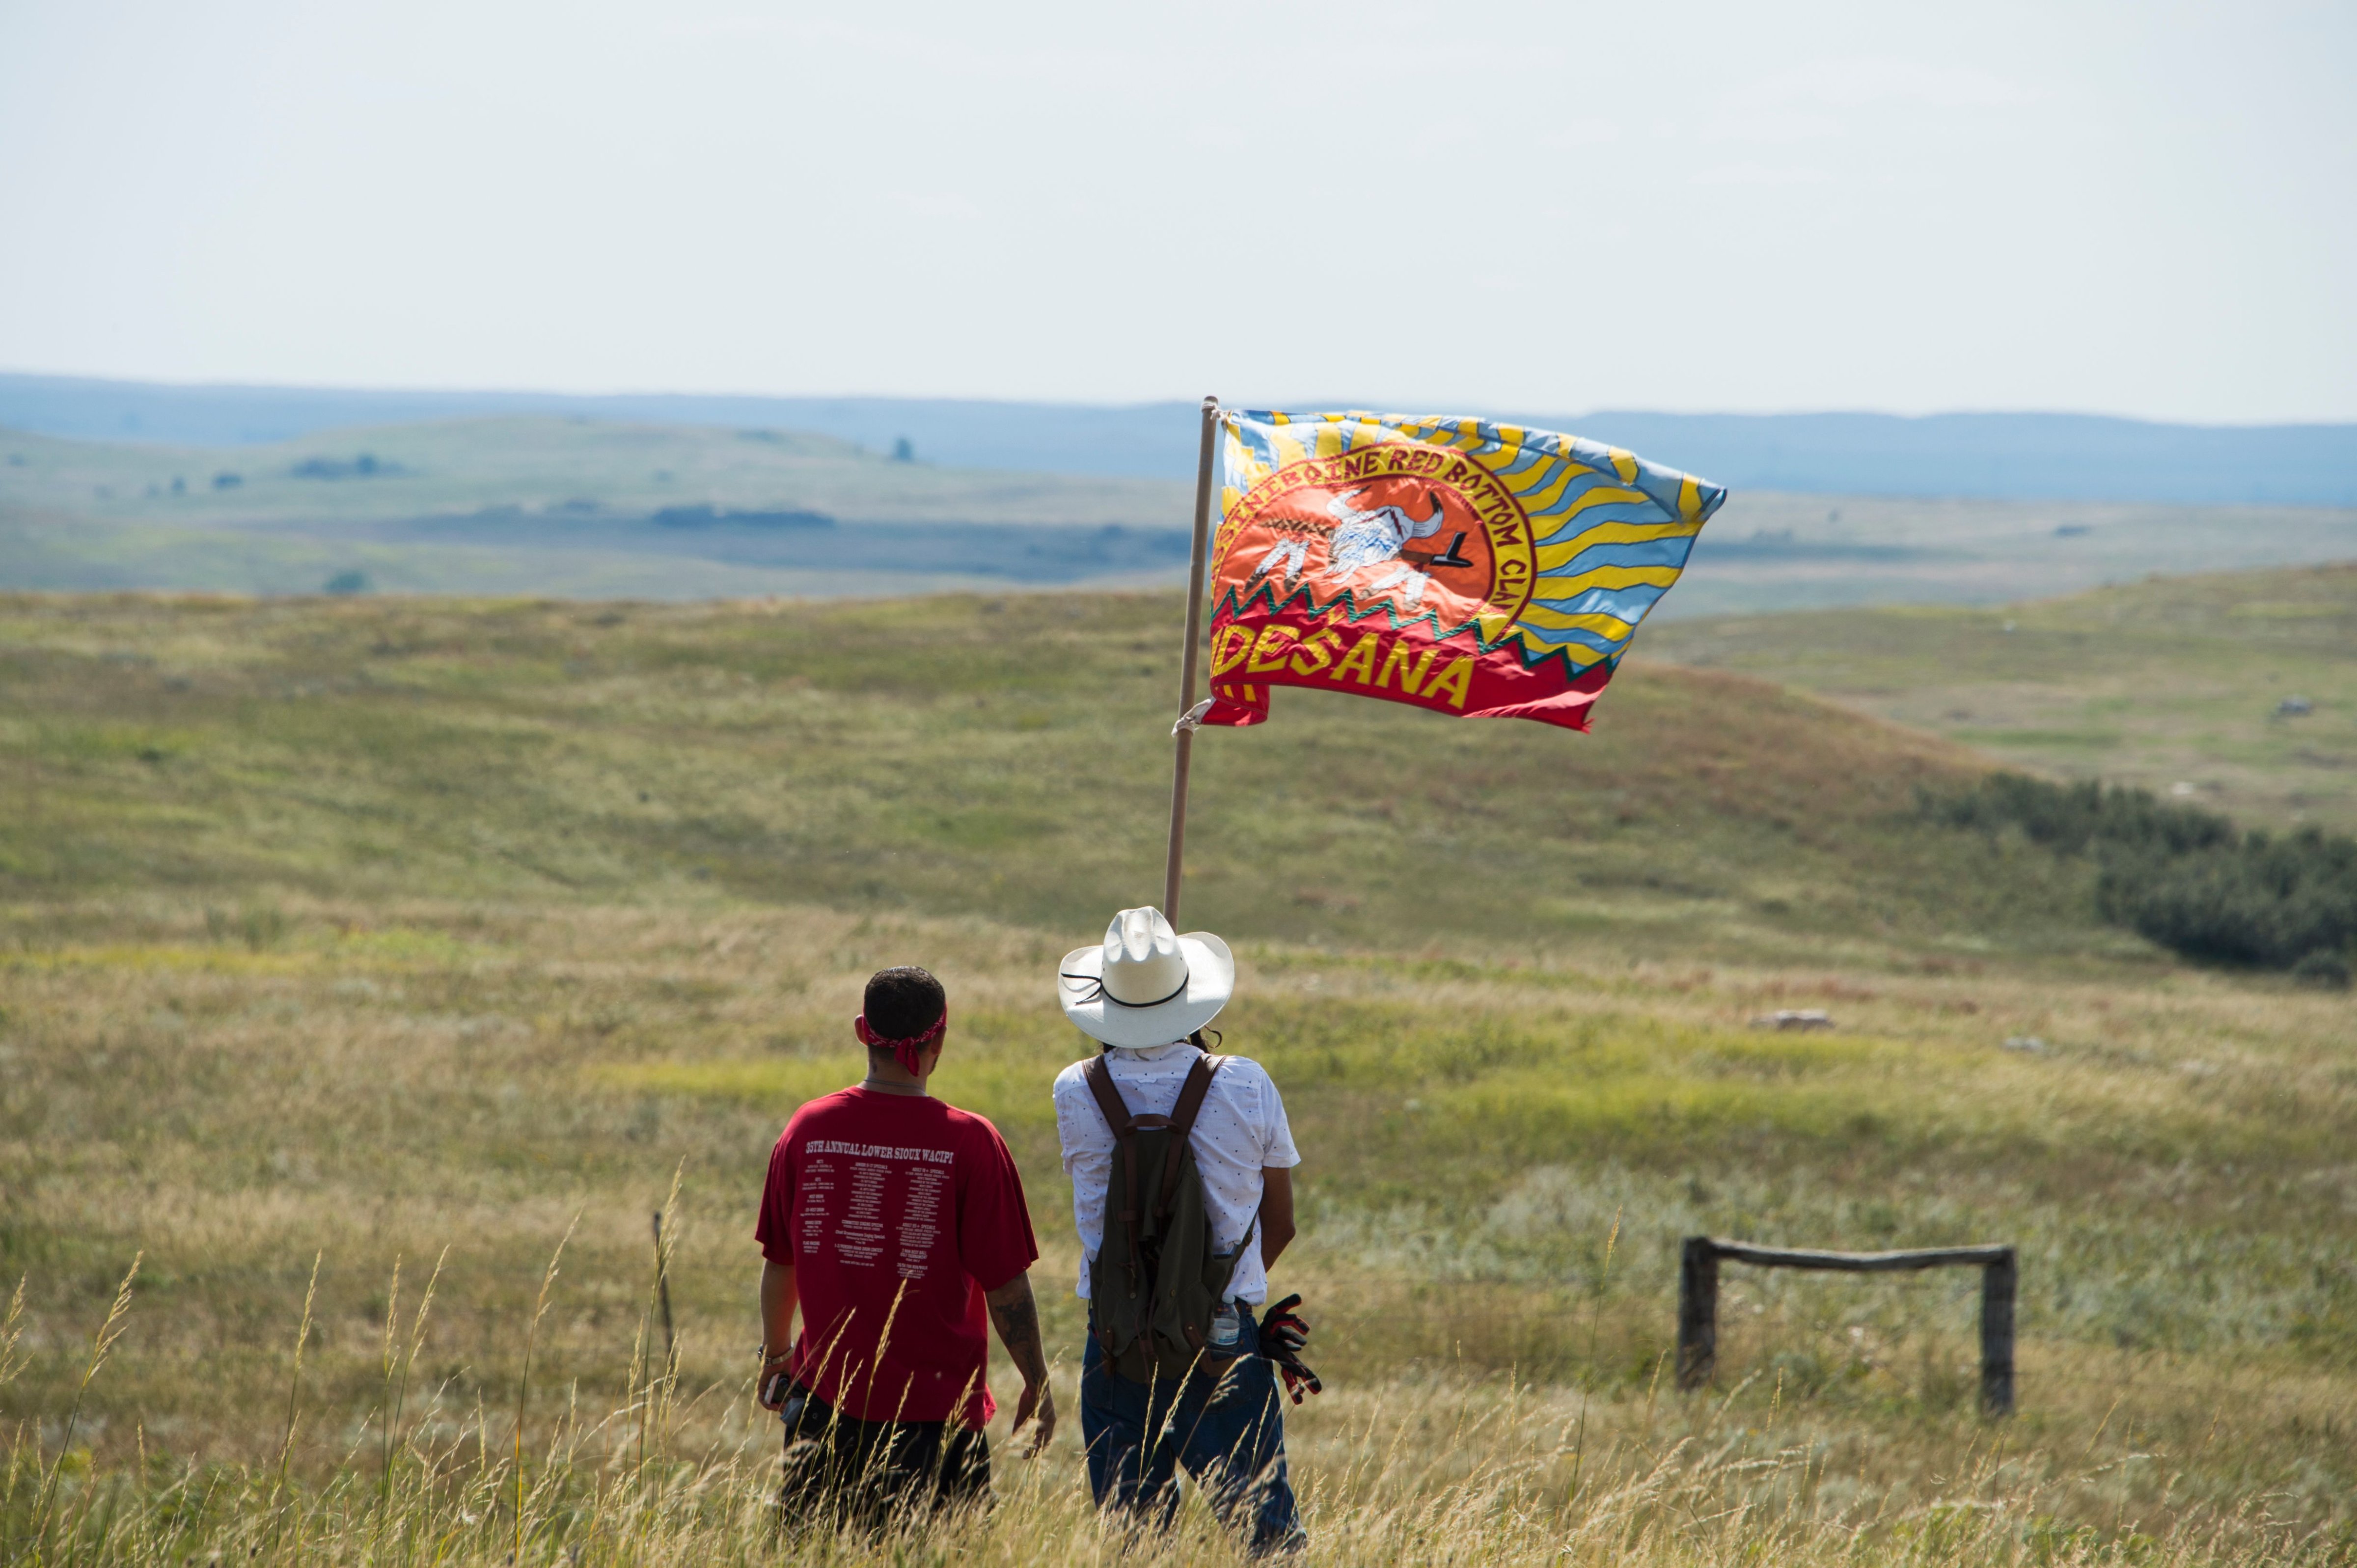 Dakota Access Pipeline protest by Standing Rock Sioux